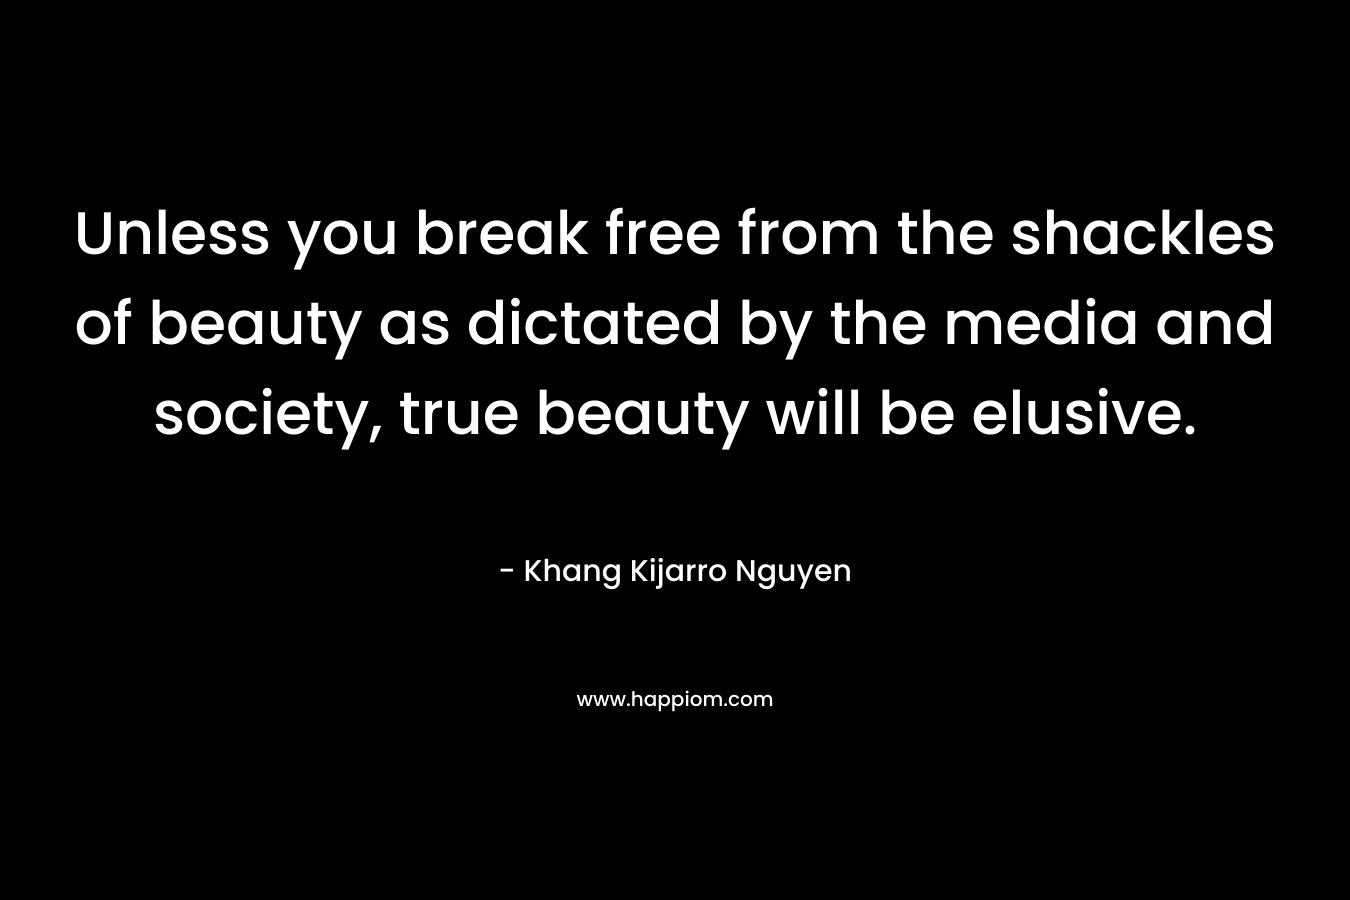 Unless you break free from the shackles of beauty as dictated by the media and society, true beauty will be elusive.